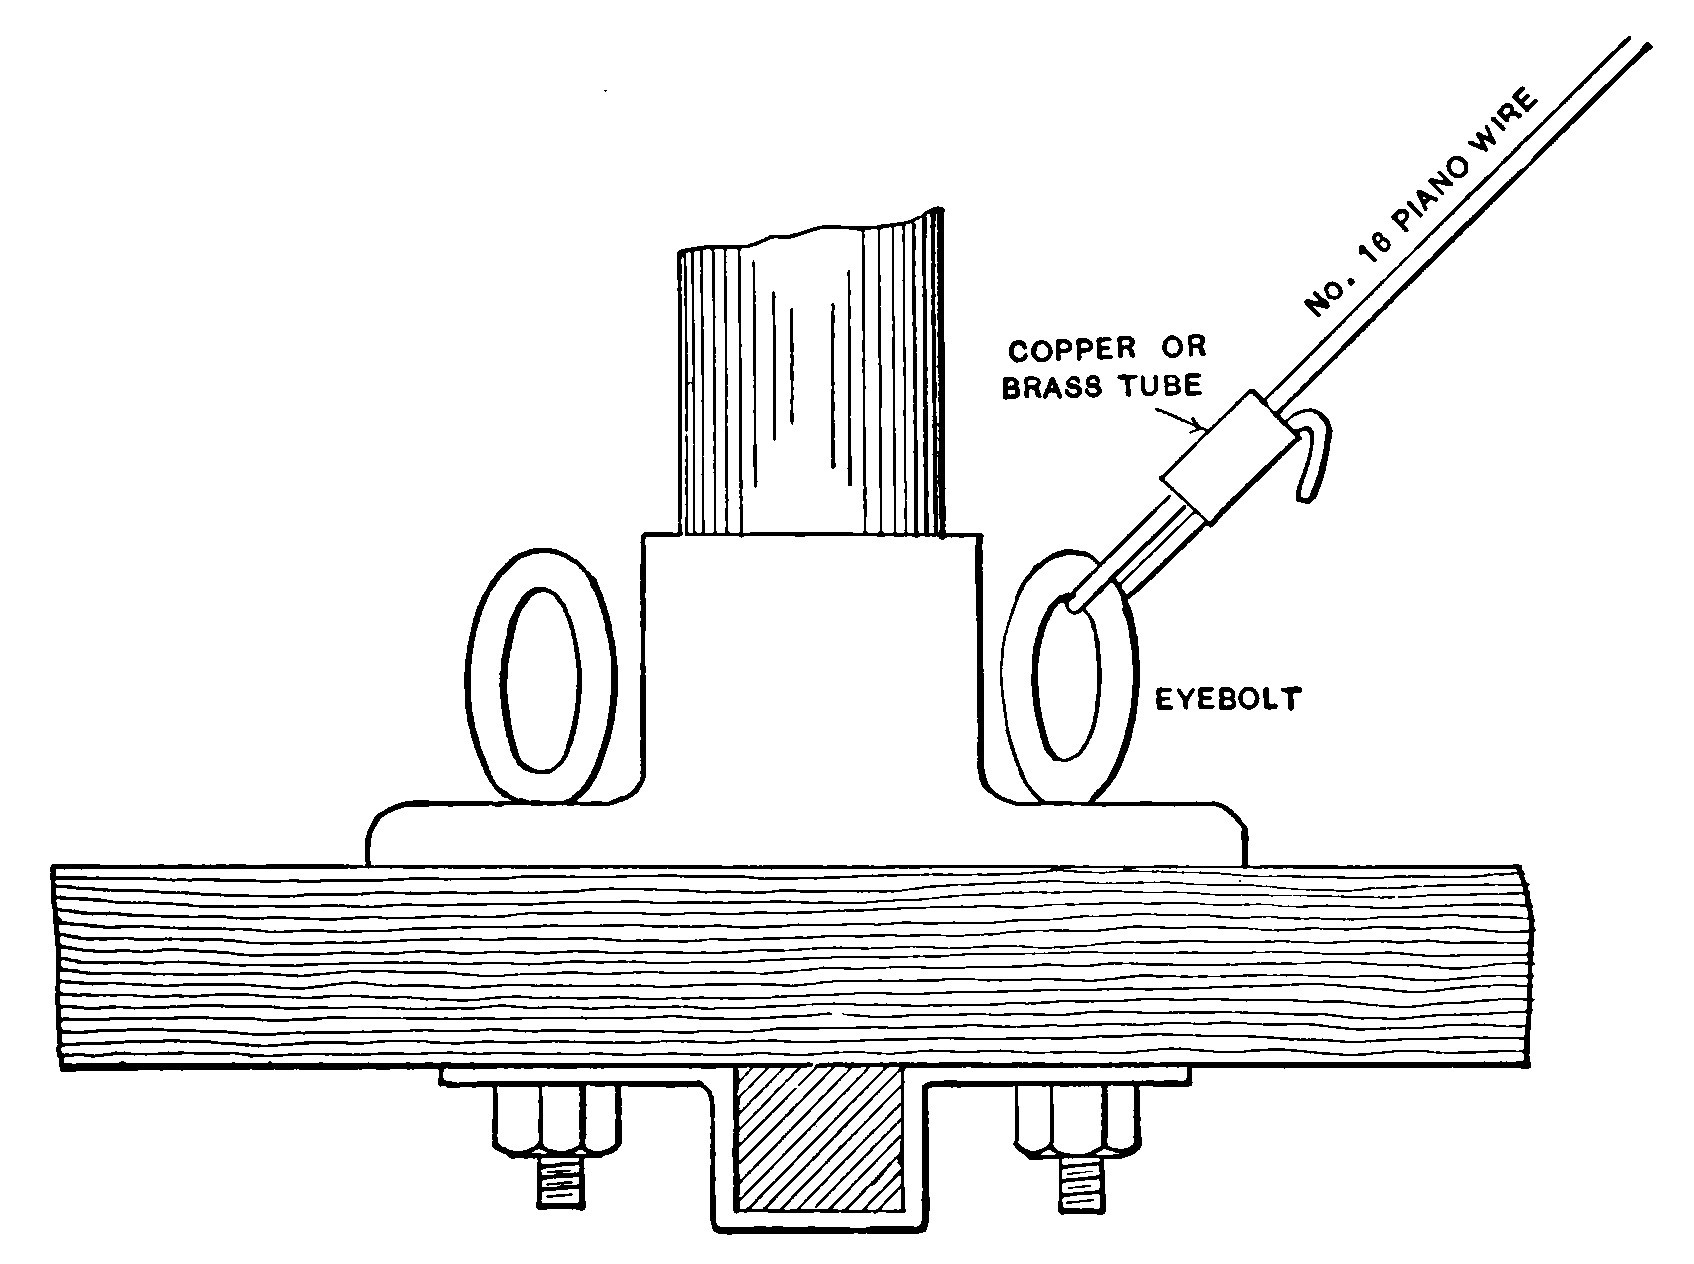 Fig. 24.—Method of anchoring wires